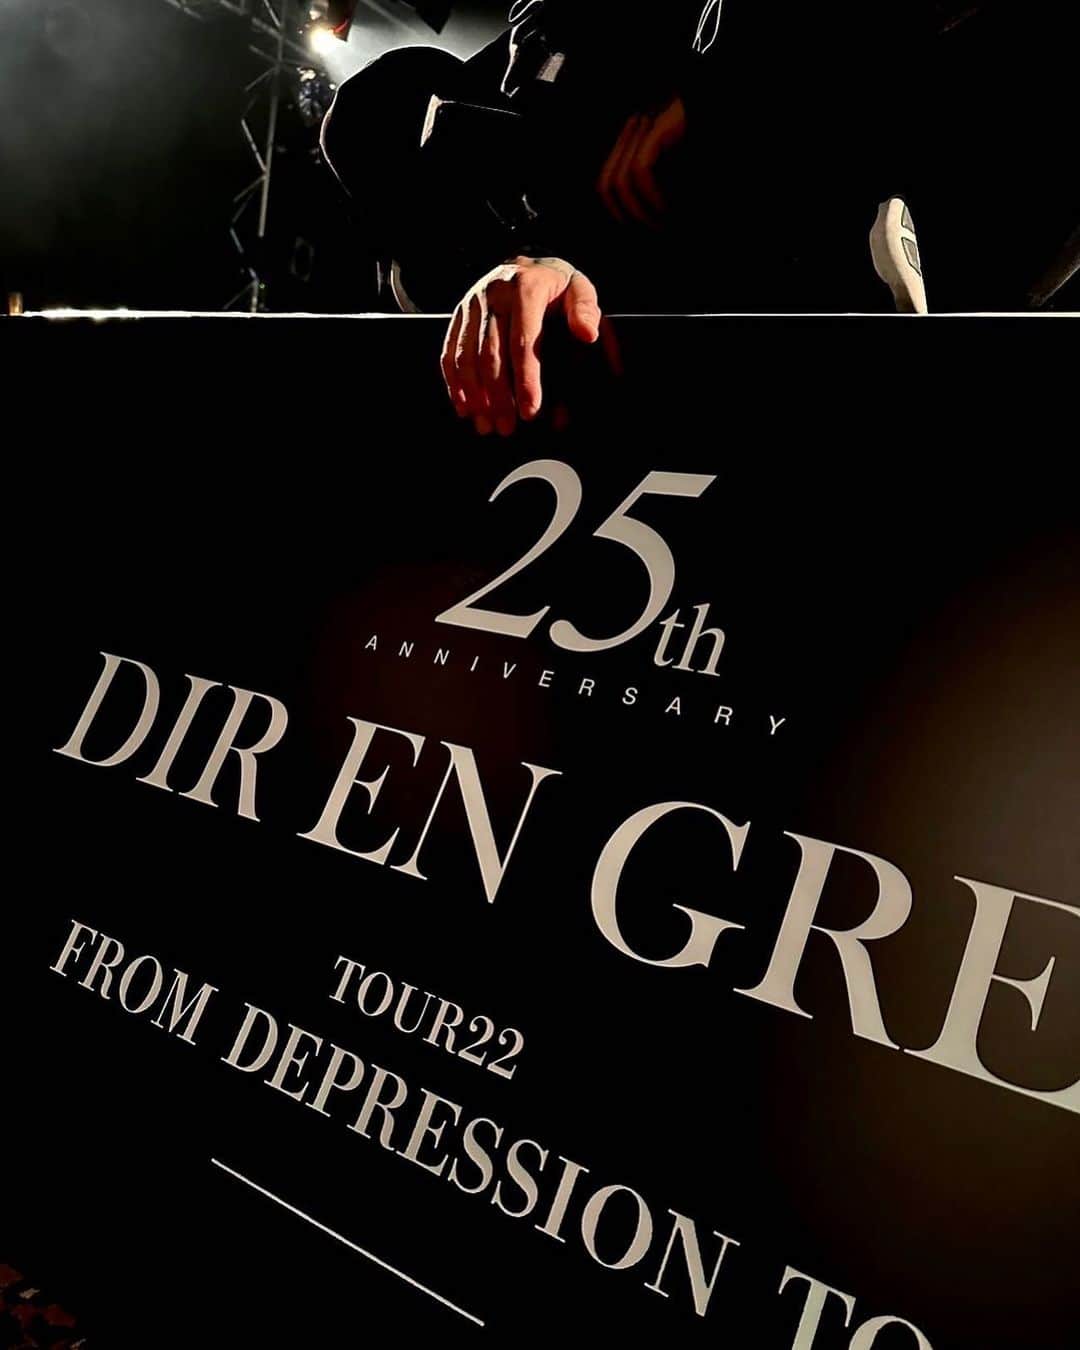 DIR EN GREYのインスタグラム：「. ［🇯🇵 JP 🇯🇵］［🇬🇧 EN 🇺🇸］ 本日！“TOUR22 FROM DEPRESSION TO ________ -「a knot」LIMITED EXTRA-”新宿BLAZE公演！遂に声出し解禁となる追加公演が本日開催！🗣場内はかなりの混雑が予想されますので、ご来場の方は体調管理をしっかりして楽しみましょう！🔥🔥🔥 半袖大好きマネージャー藤枝 ※ モデルは薫📸  ◤◢◤◢◤◢ ↓ 🇬🇧 EN 🇺🇸 ↓ ◤◢◤◢◤◢  Today's “TOUR22 FROM DEPRESSION TO ________ -「a knot」LIMITED EXTRA-” concert at Shinjuku BLAZE! You can finally raise your voices during the concert today🗣We expect the venue to be pretty crowded, so please take care and enjoy the live!🔥🔥🔥 Short Sleeves lover Fujieda Manager * Model: Kaoru📸  #DIRENGREY25th」